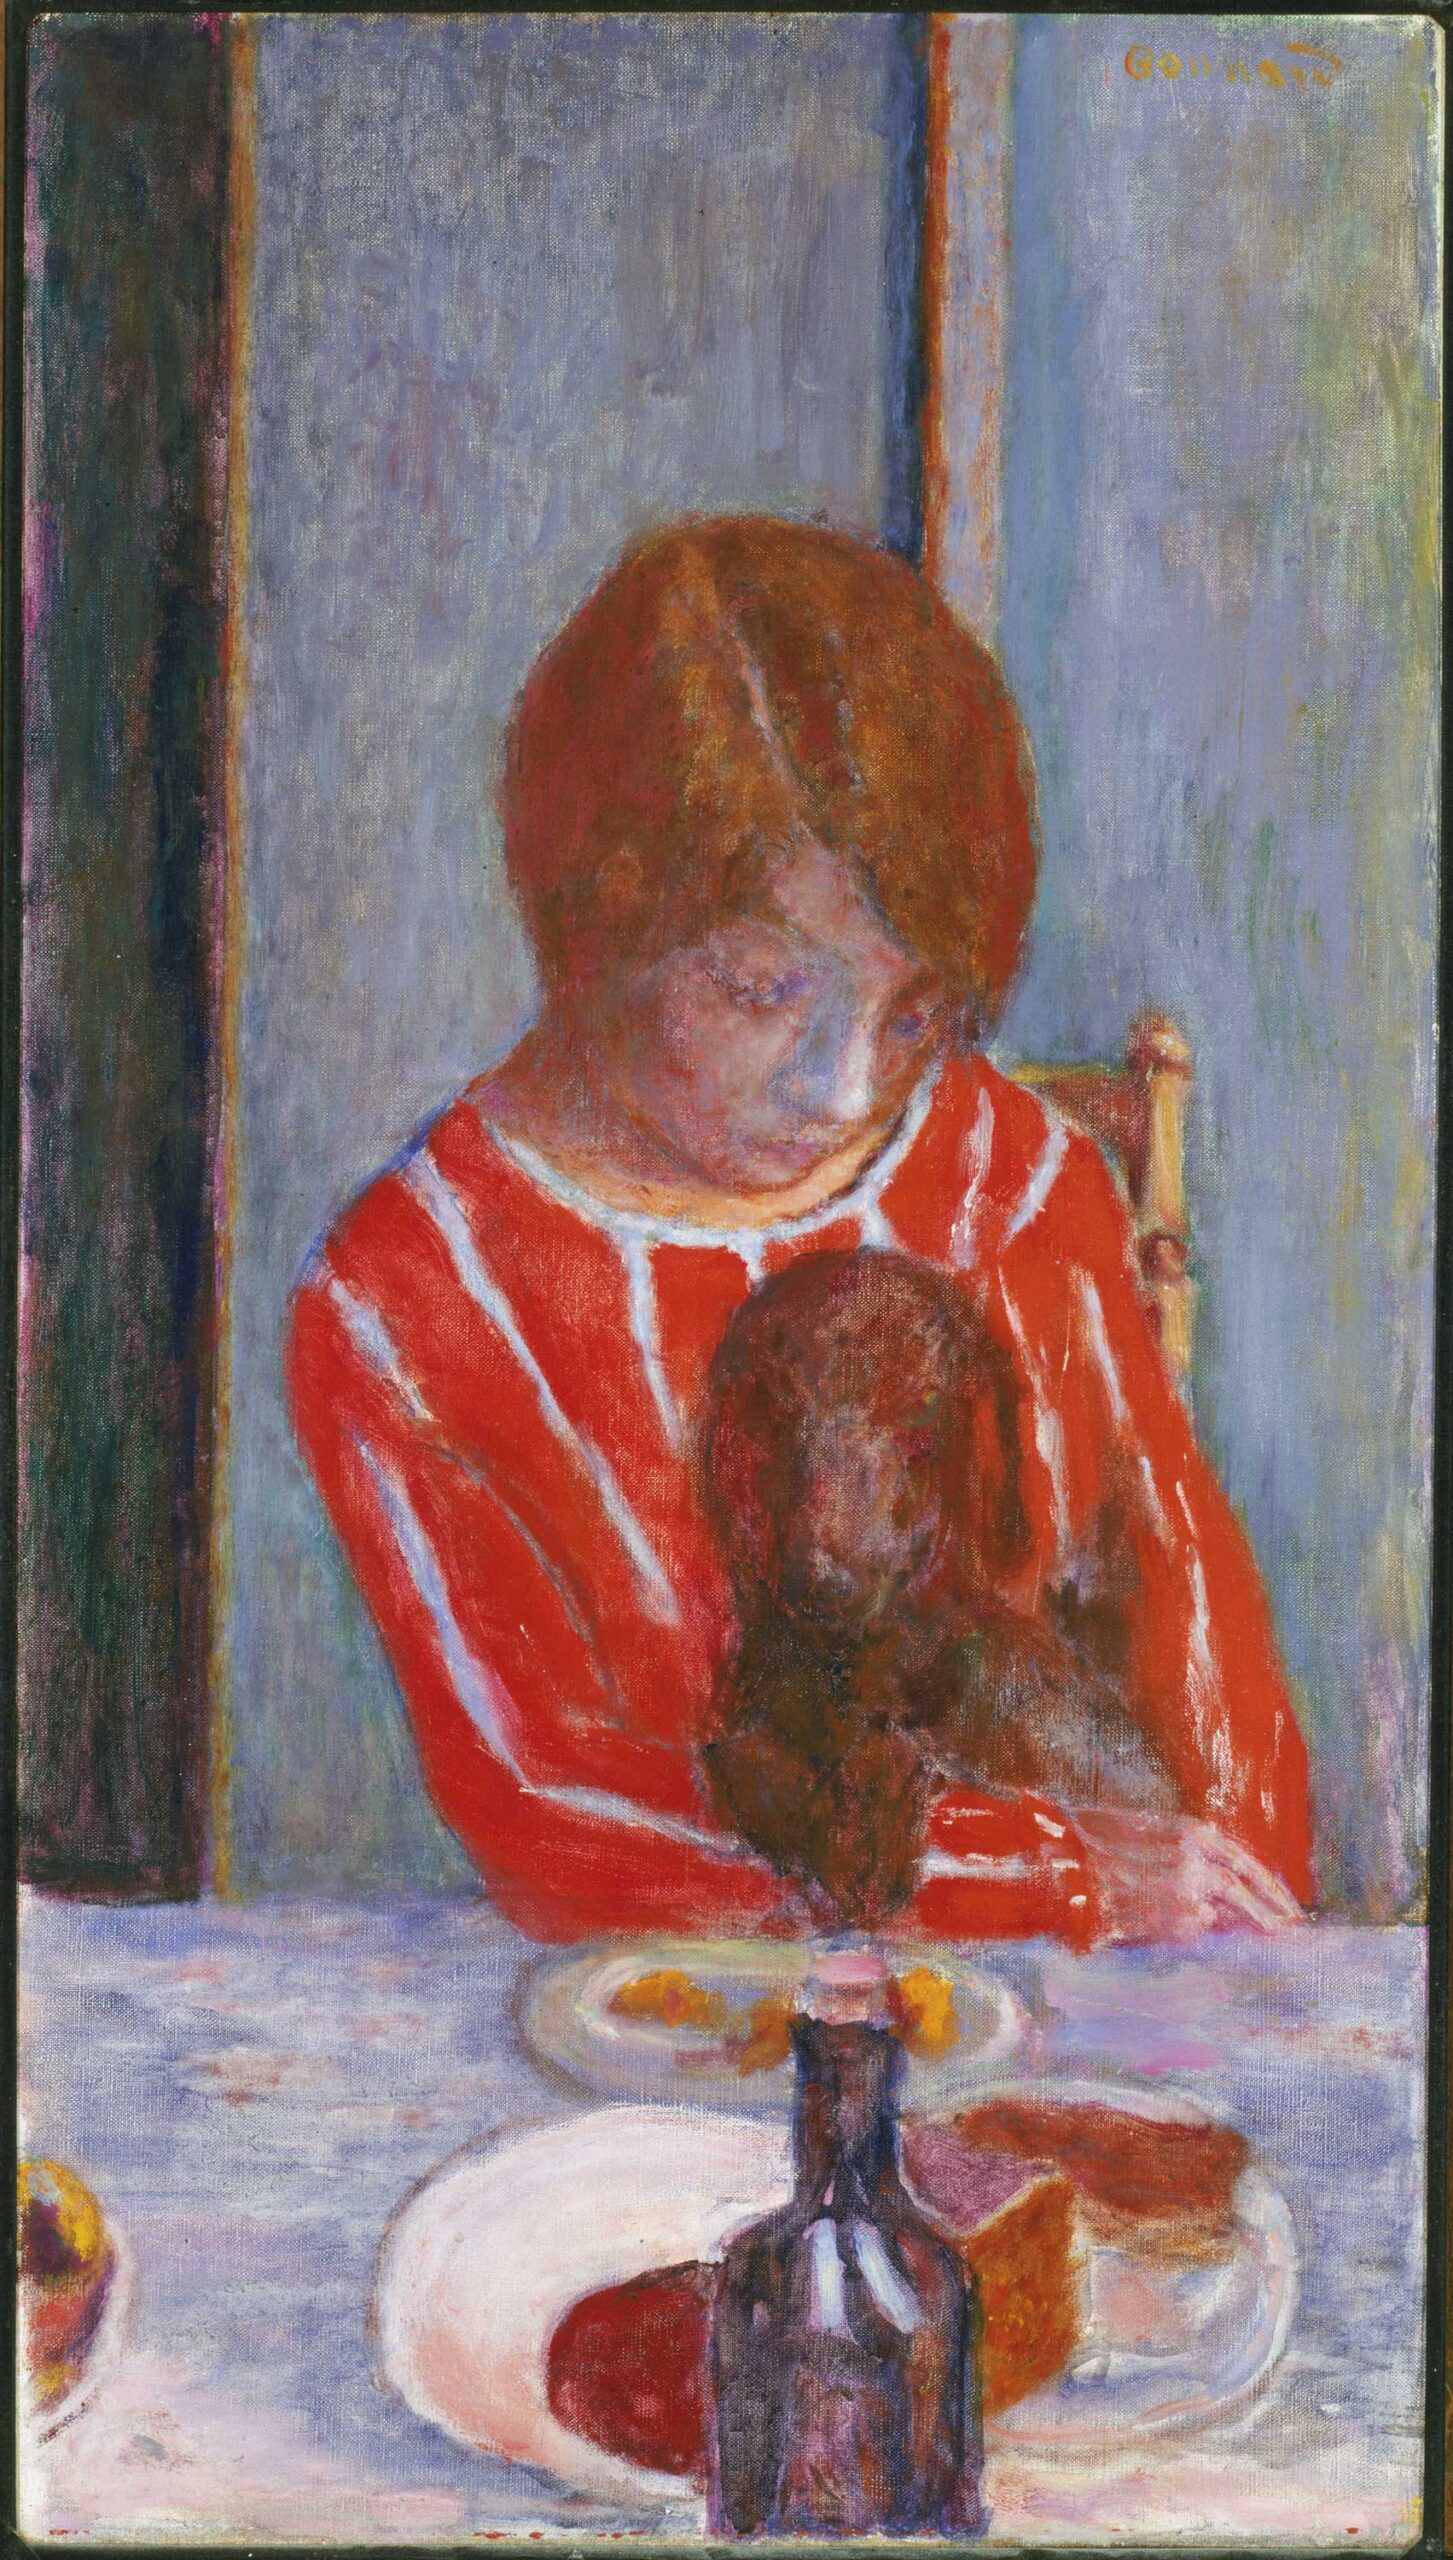 Pierre Bonnard, "Woman and Dog," 1922, oil on canvas. The Phillips Collection © 2023 Artists Rights Society (ARS), New York 